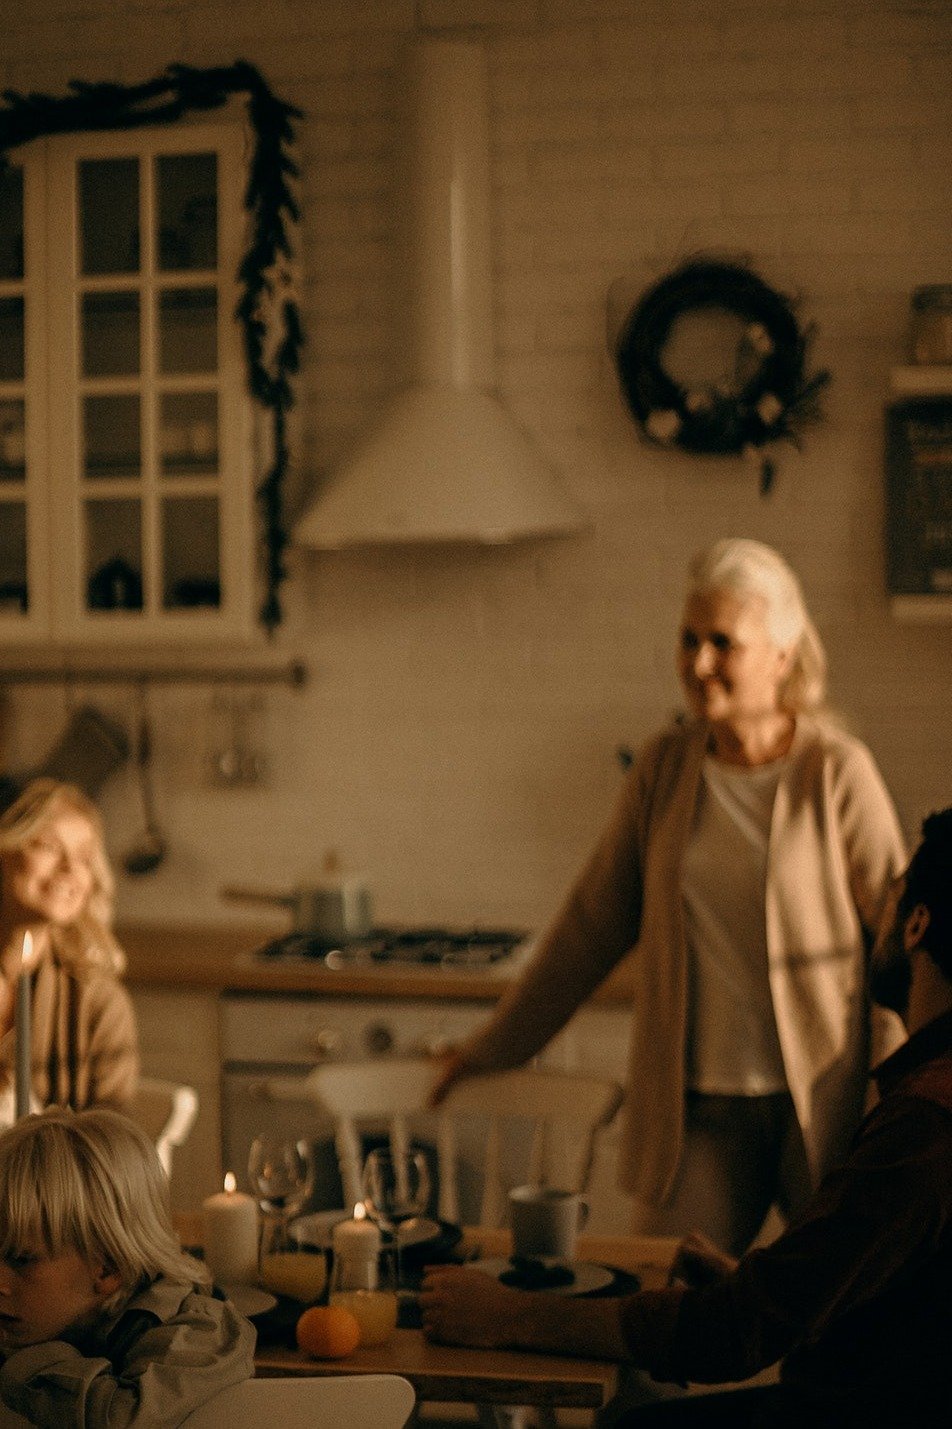 Beatrice moved on and never thought about her grandparents again. | Source: Pexels